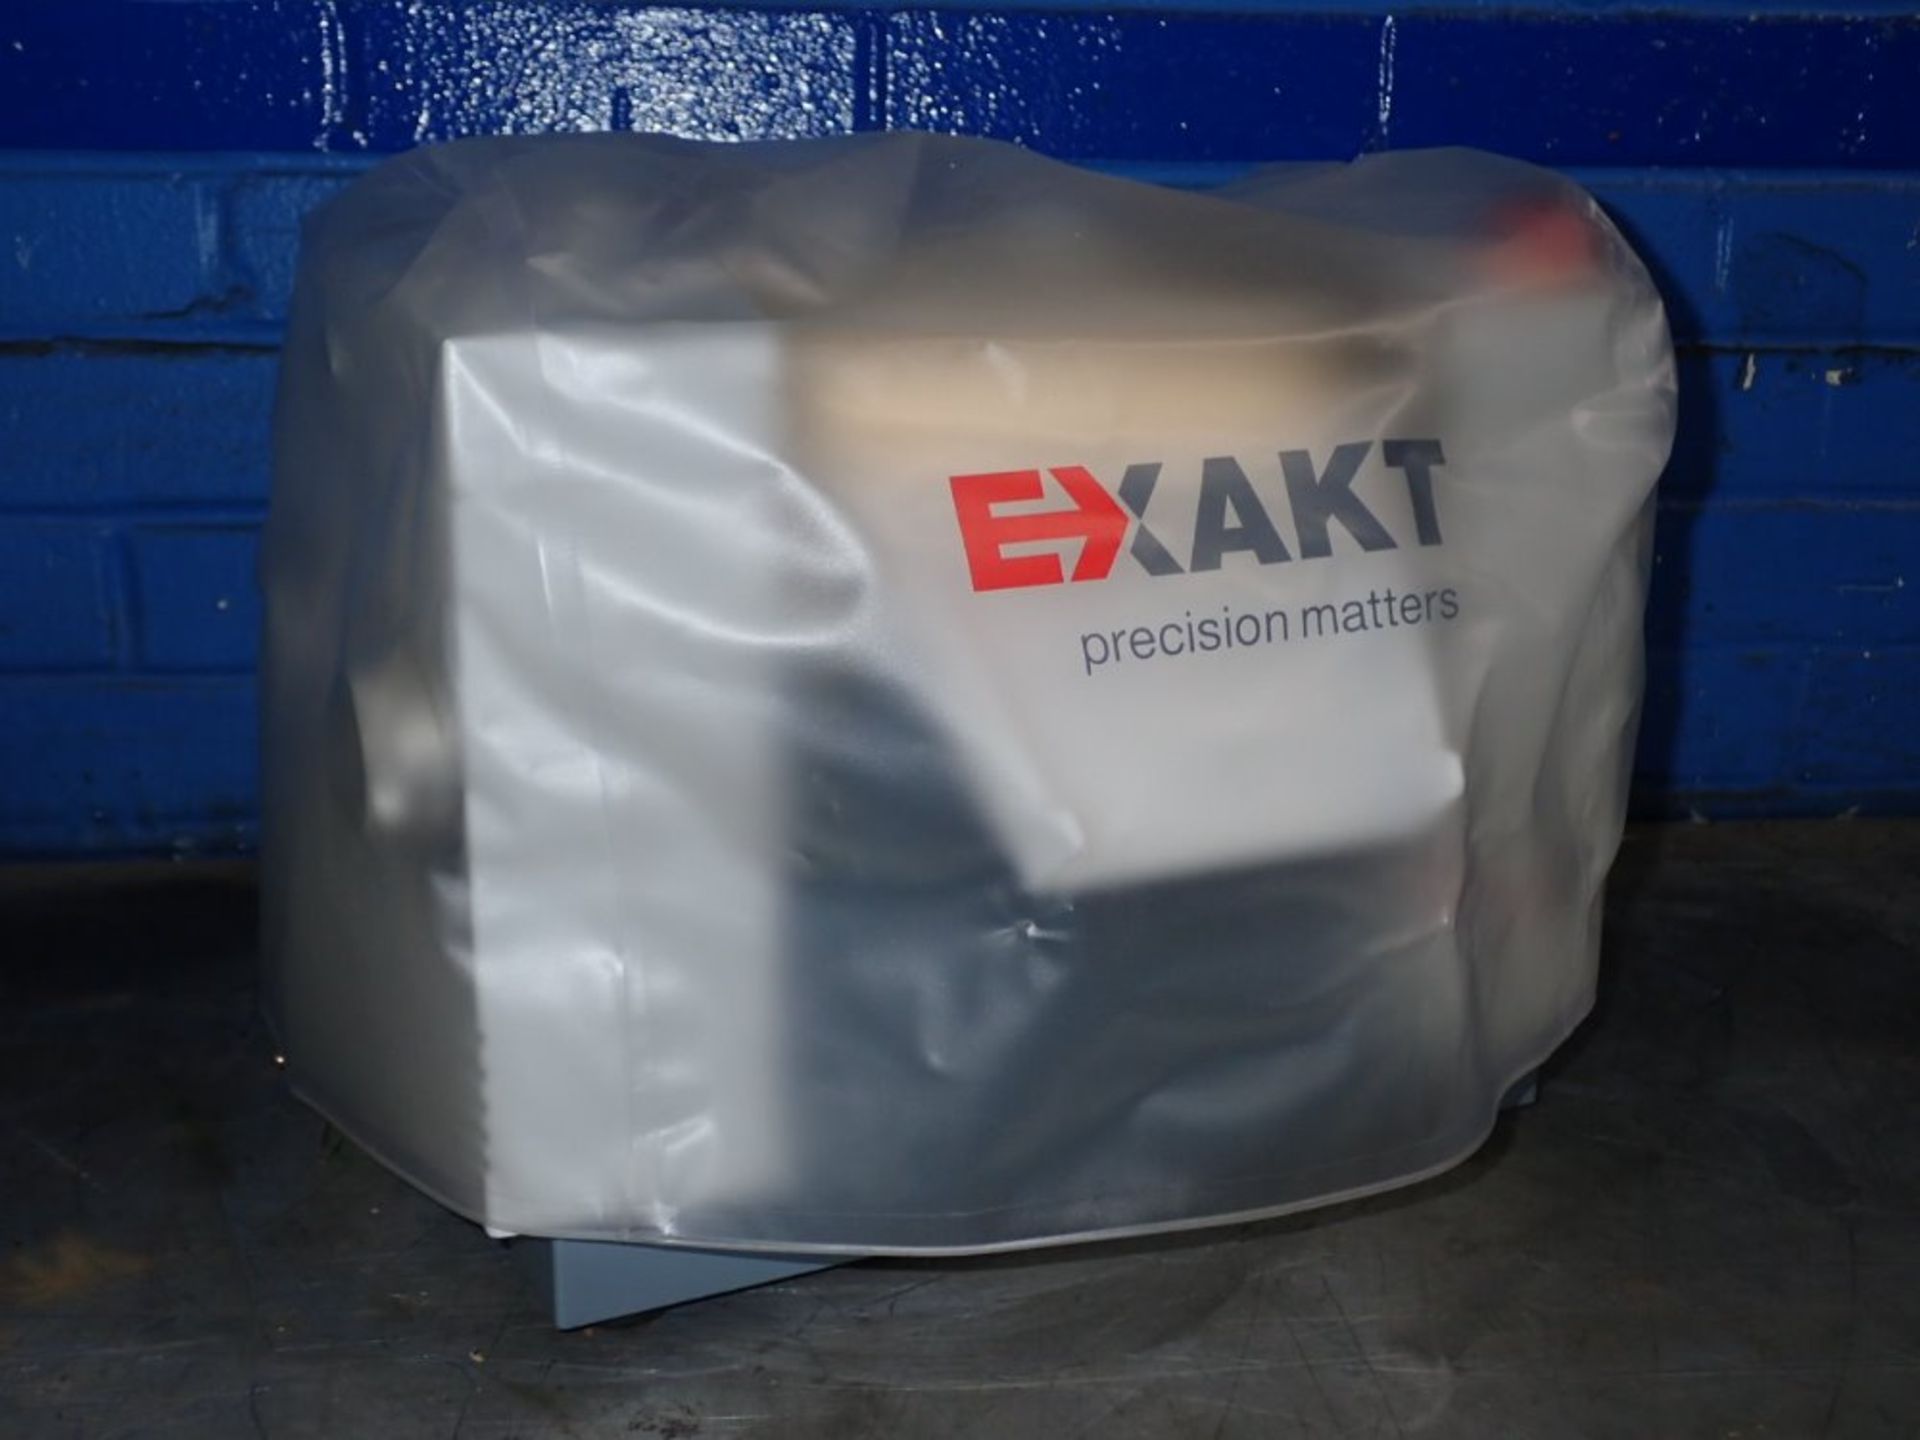 2016 Exakt Advanced Technologies 50 Ec+ Three Roll Mill, 6" Capacity | Reqd Rig Fee: Seller to Load - Image 10 of 10